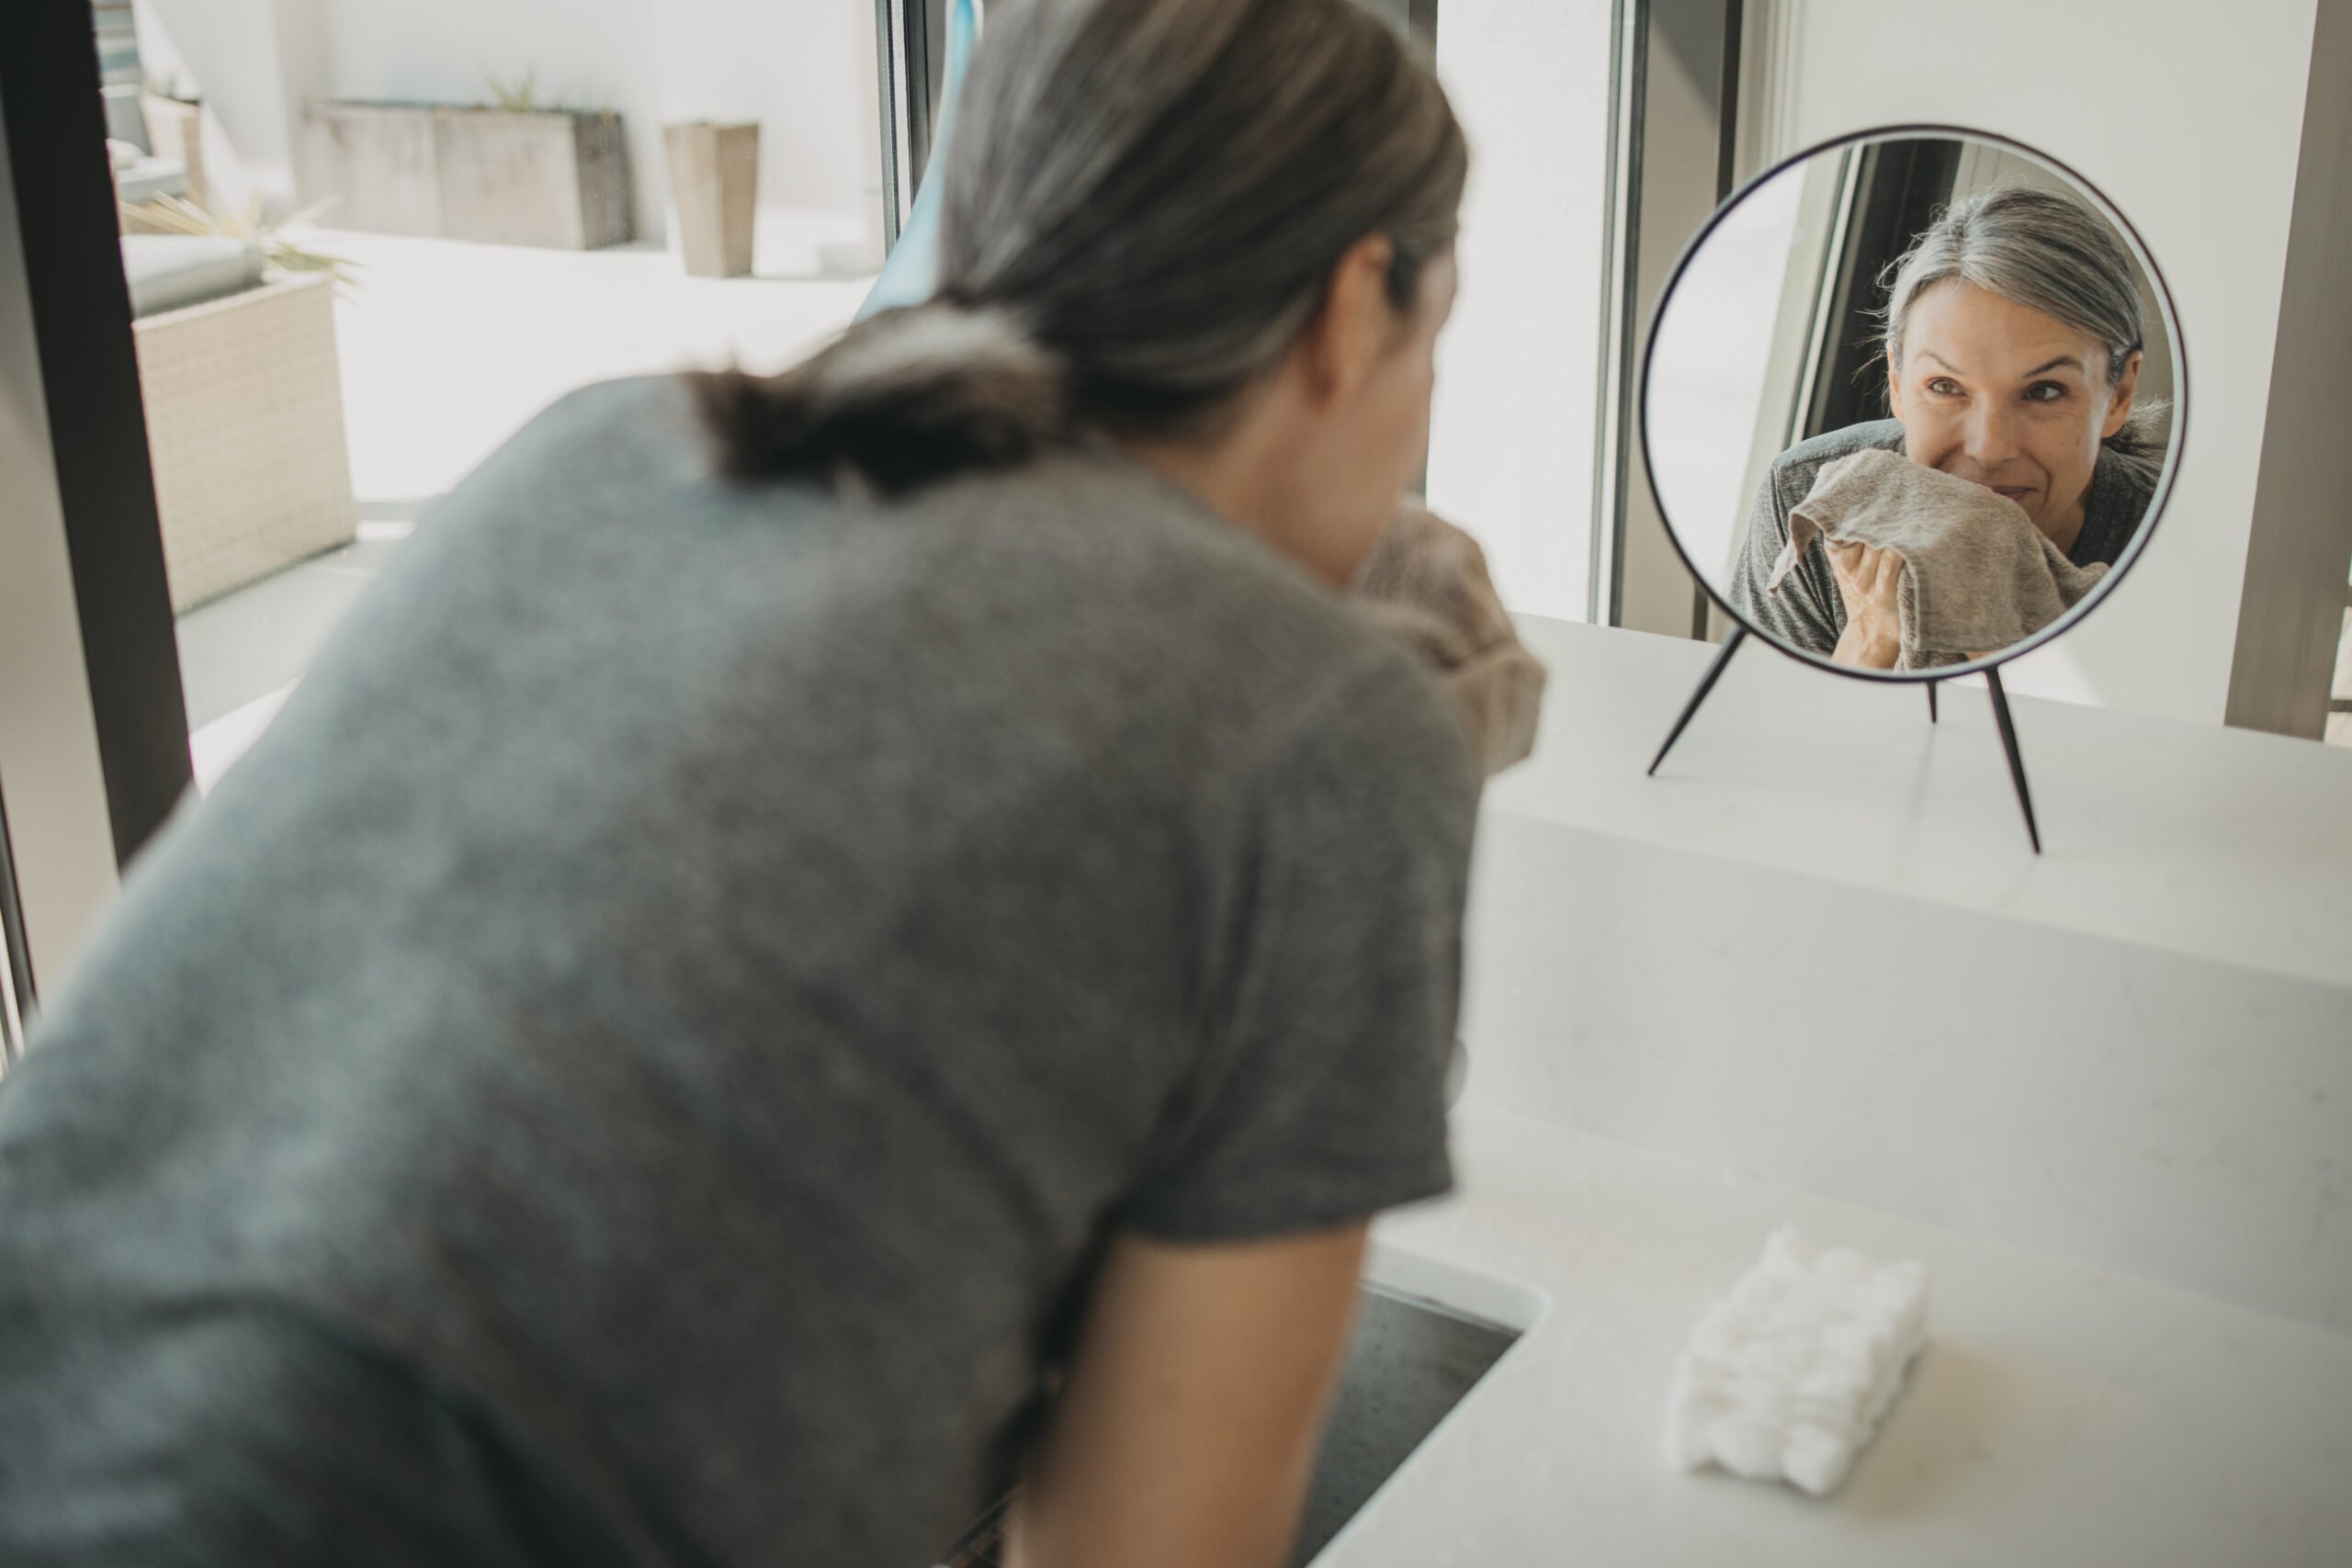 a woman drys her face with a towel while looking into a tabletop mirror